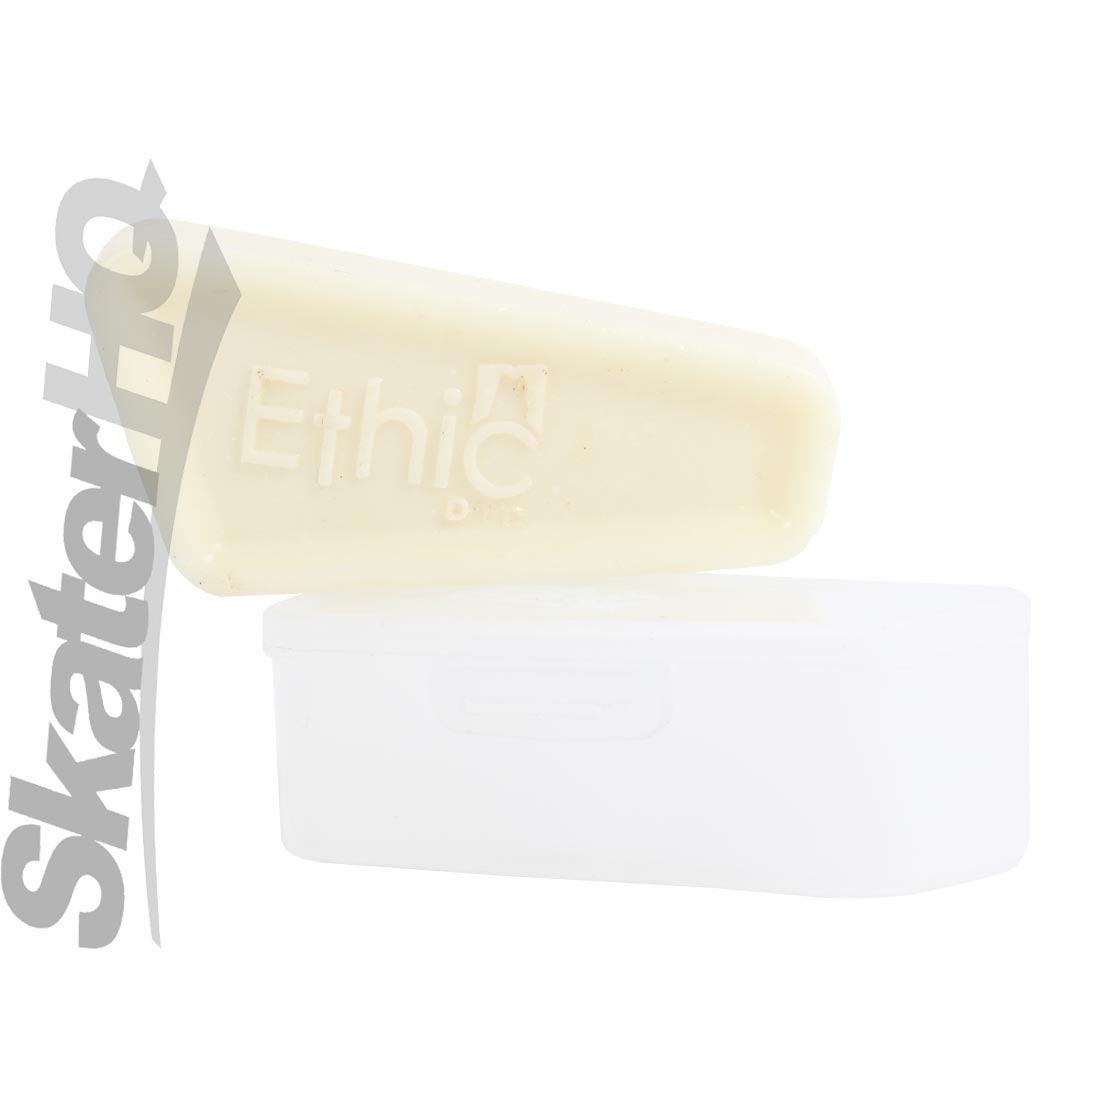 Ethic DTC Wax Block - White Scooter Accessories